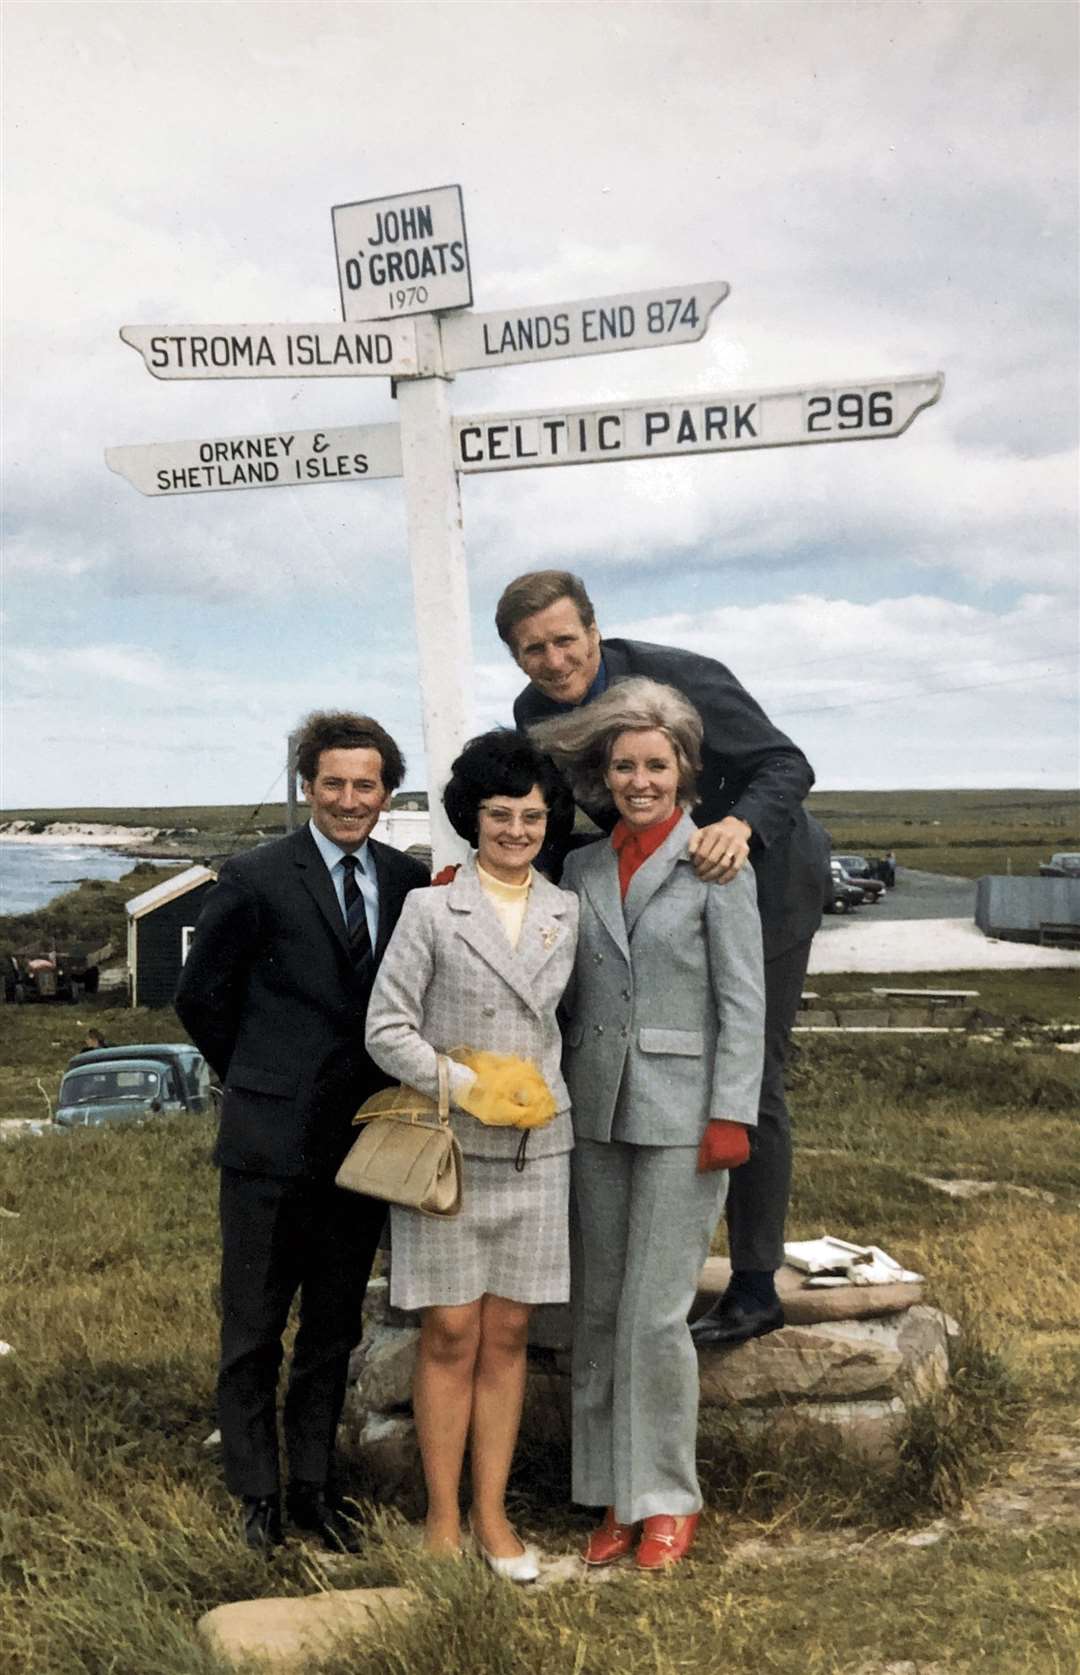 Billy McNeill and his wife Liz with Caithness Celtic Supporters Club representatives Robin More and Sheena Miller at the John O'Groats signpost in July 1970. Picture: Caithness CSC